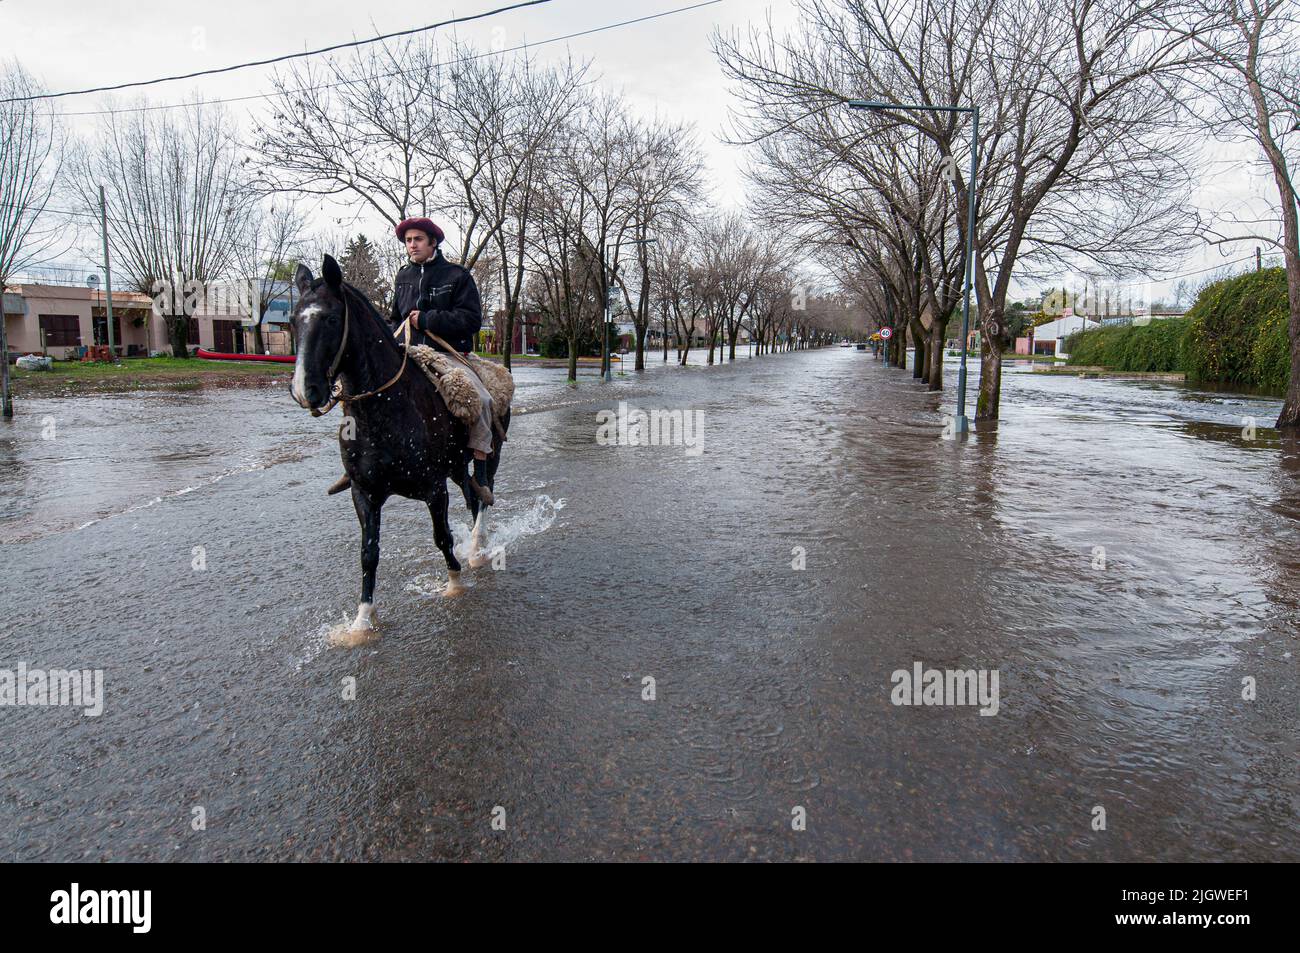 A Hispanic man riding a horse on the street because of floods in San Antonio de Areco, Buenos Aires, Argentina Stock Photo